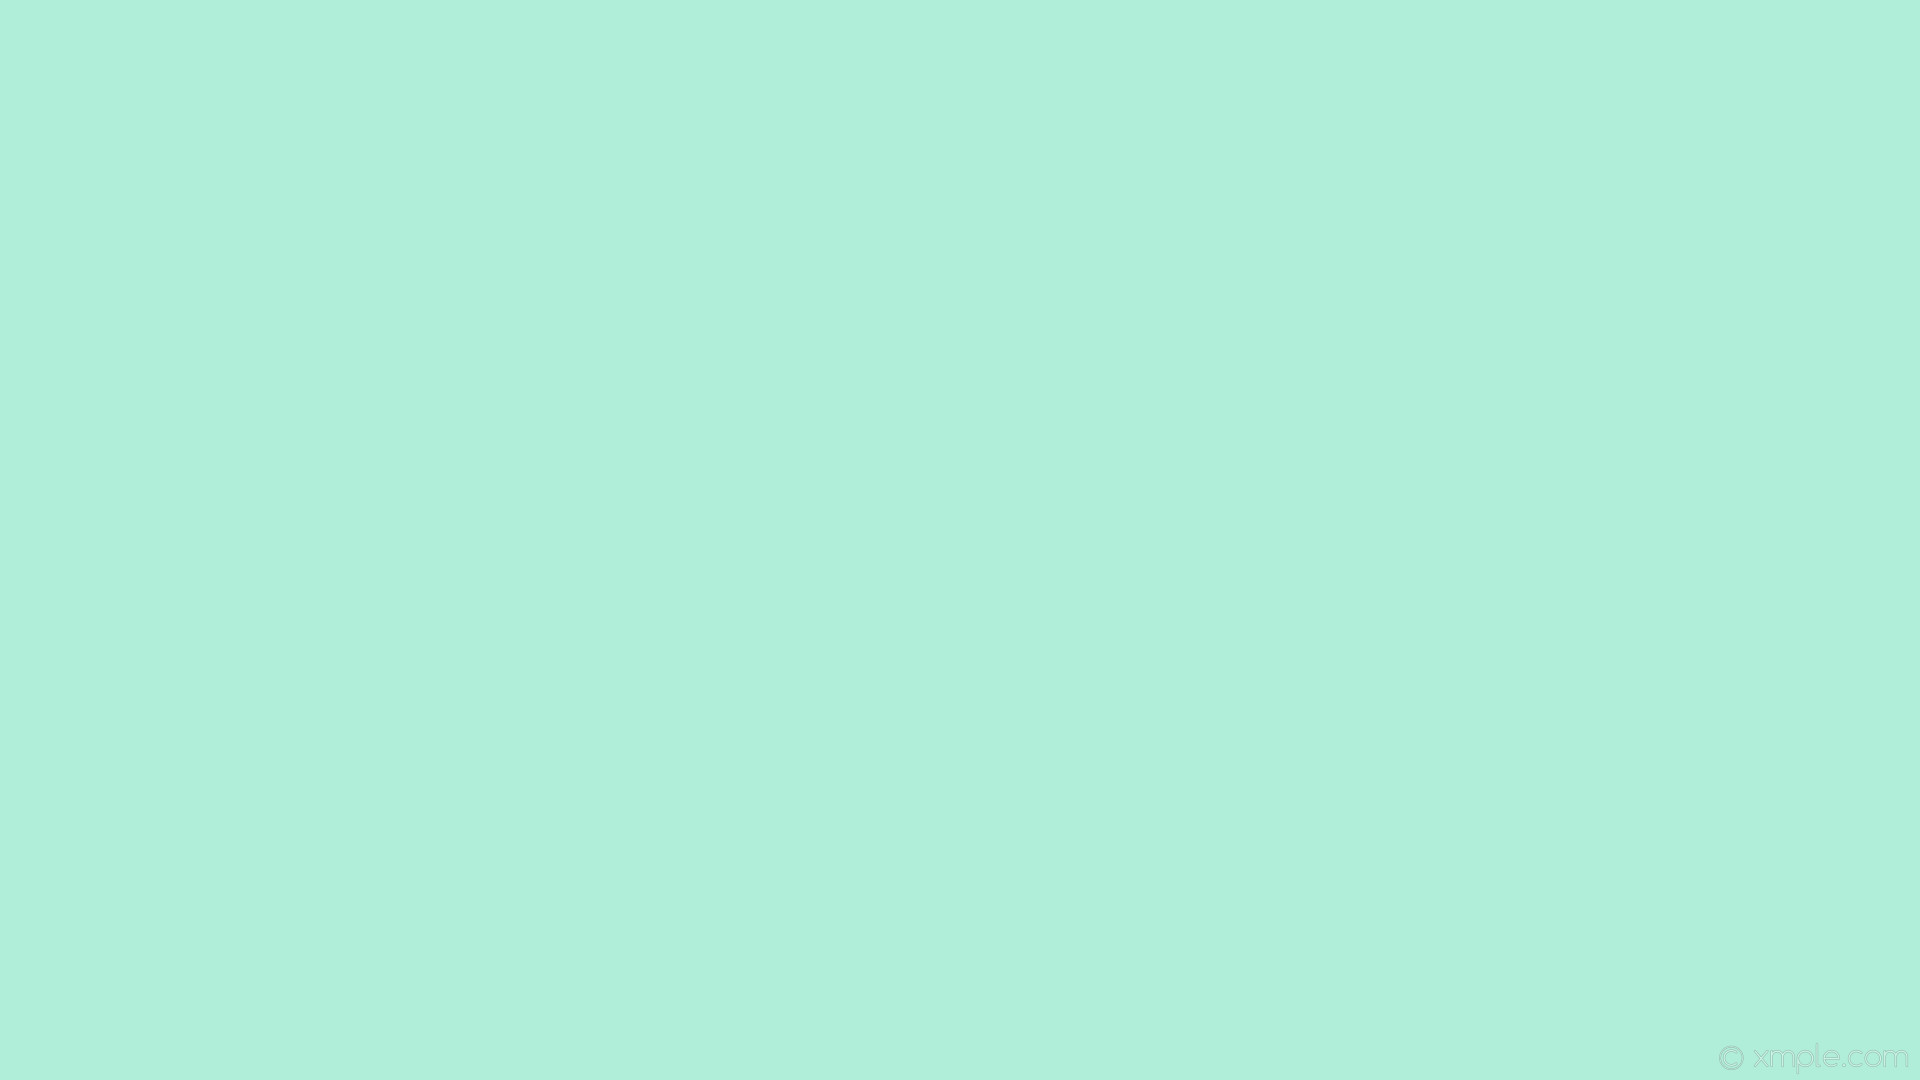 1920x1080 wallpaper one colour single solid color turquoise plain light turquoise  #b0eeda